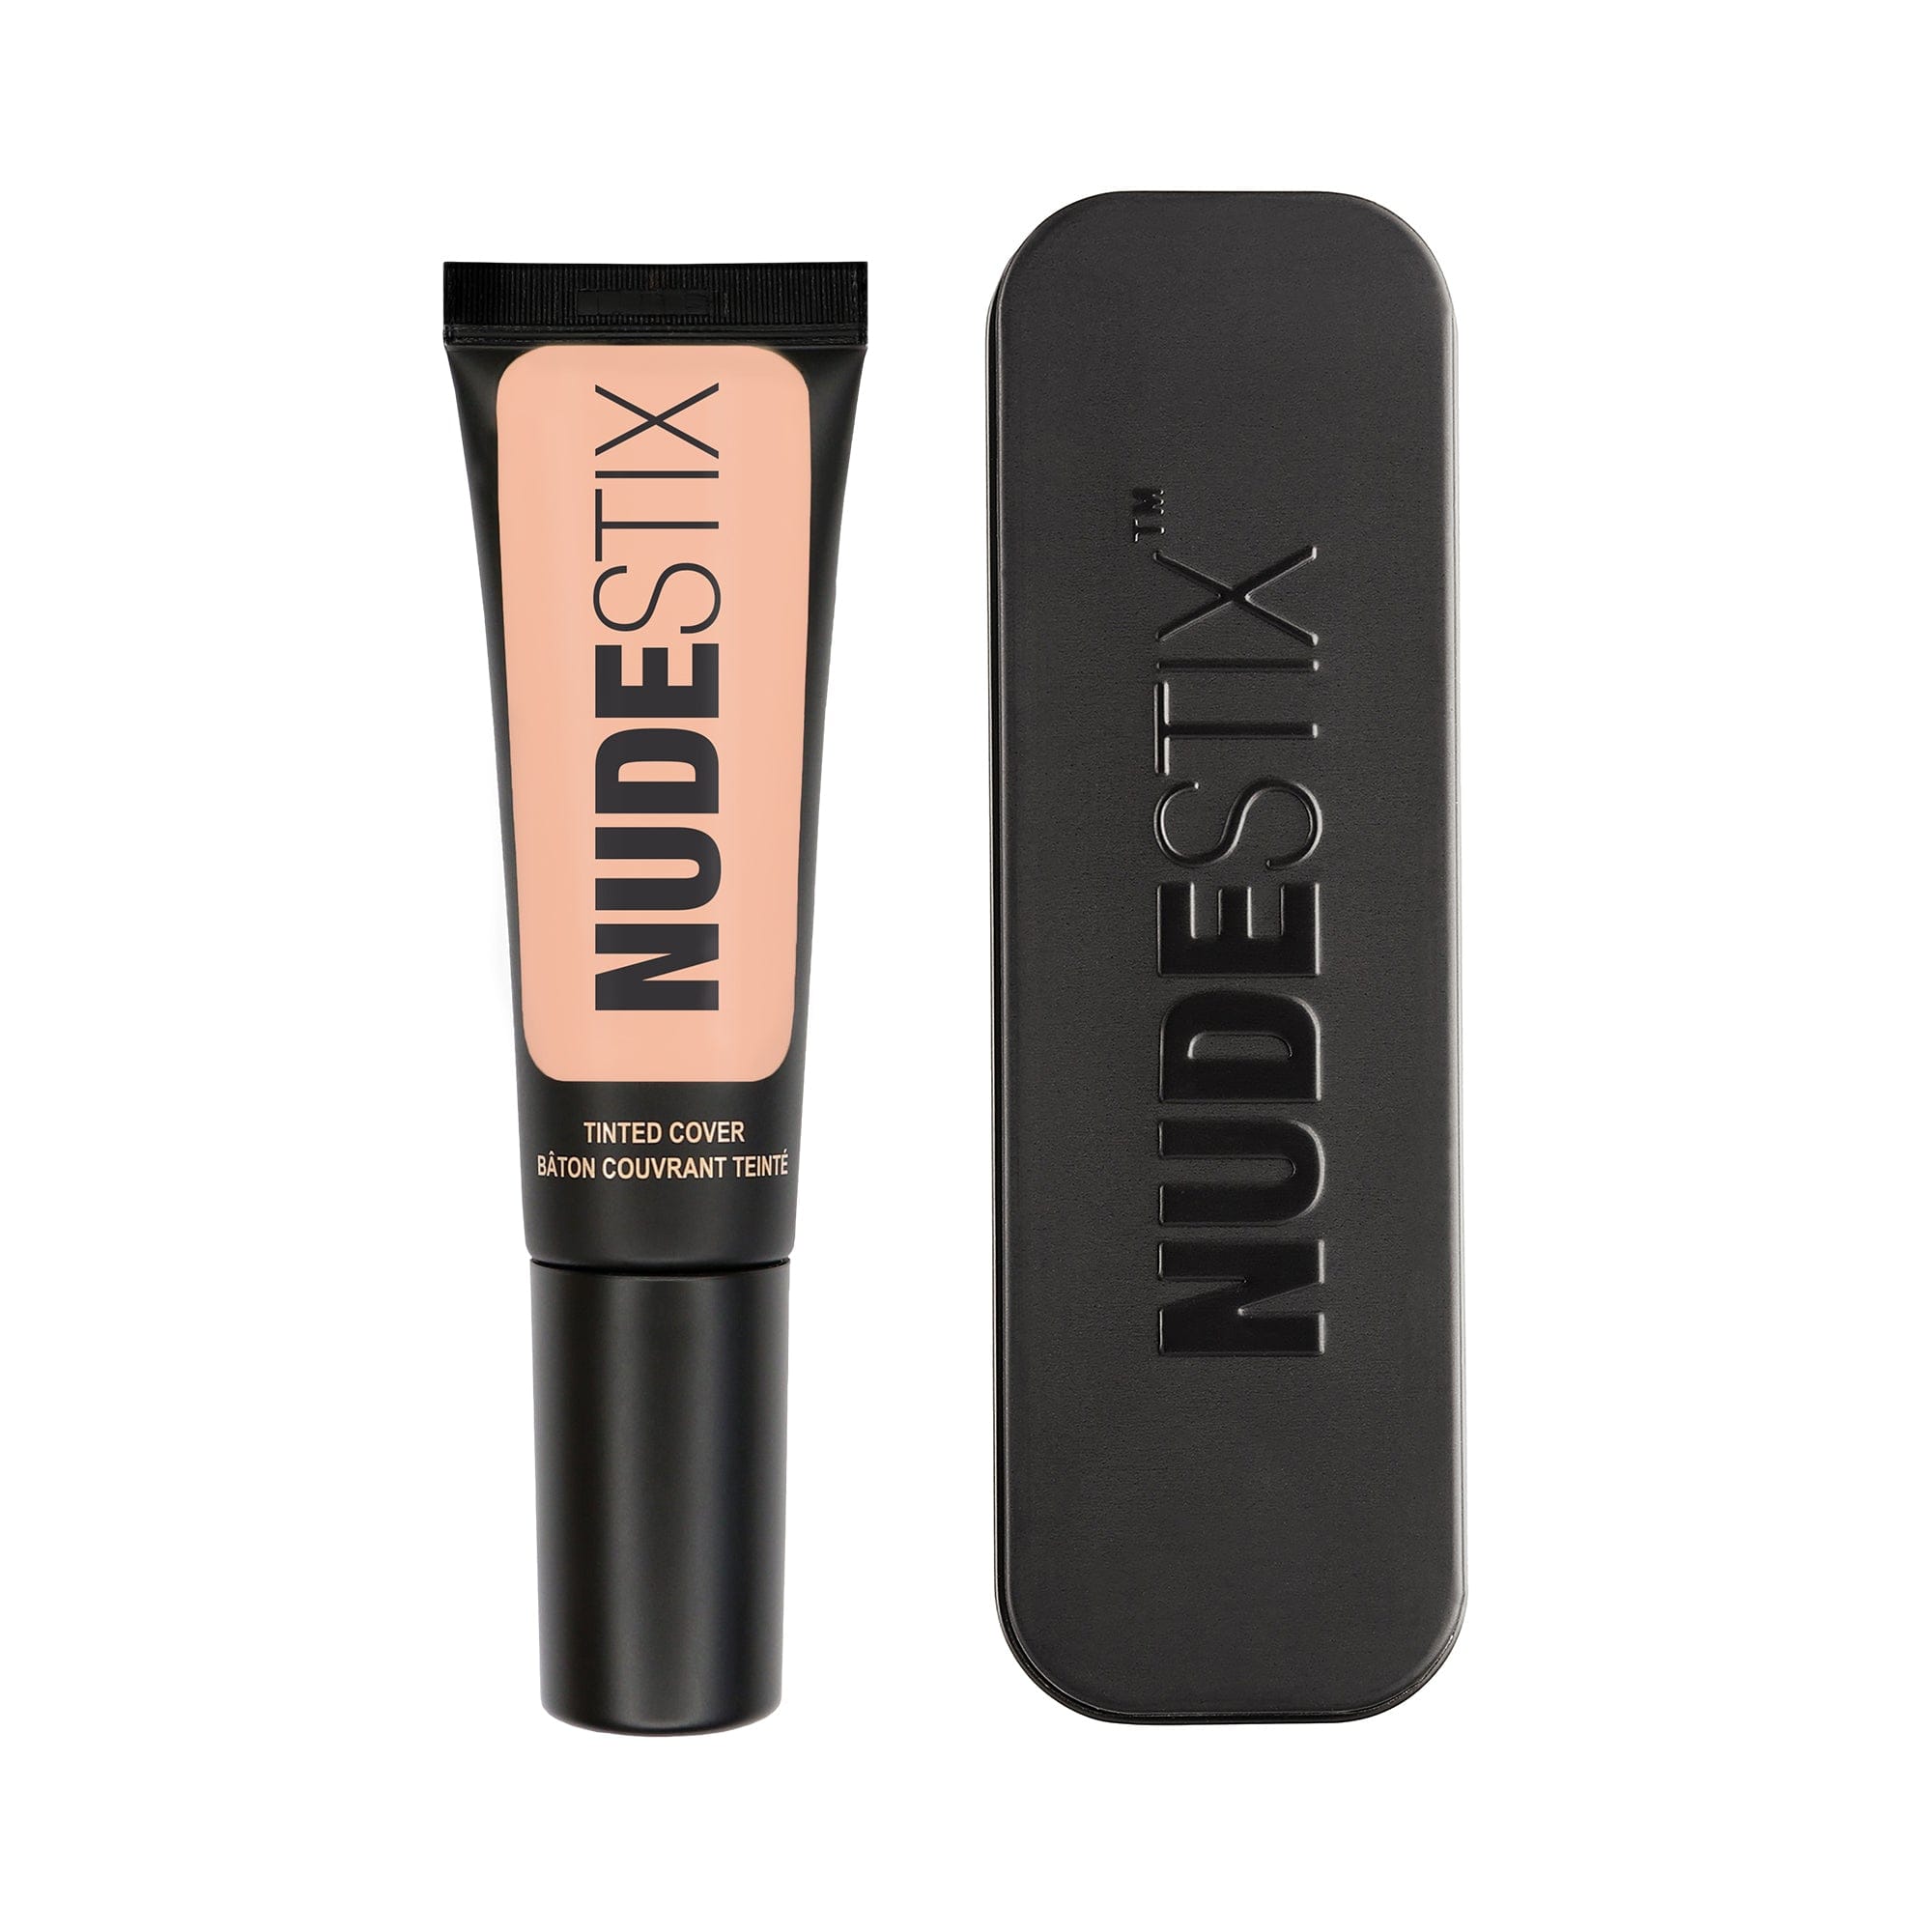 Tinted Cover Foundation in shade Nude 2.5 and Nudestix can